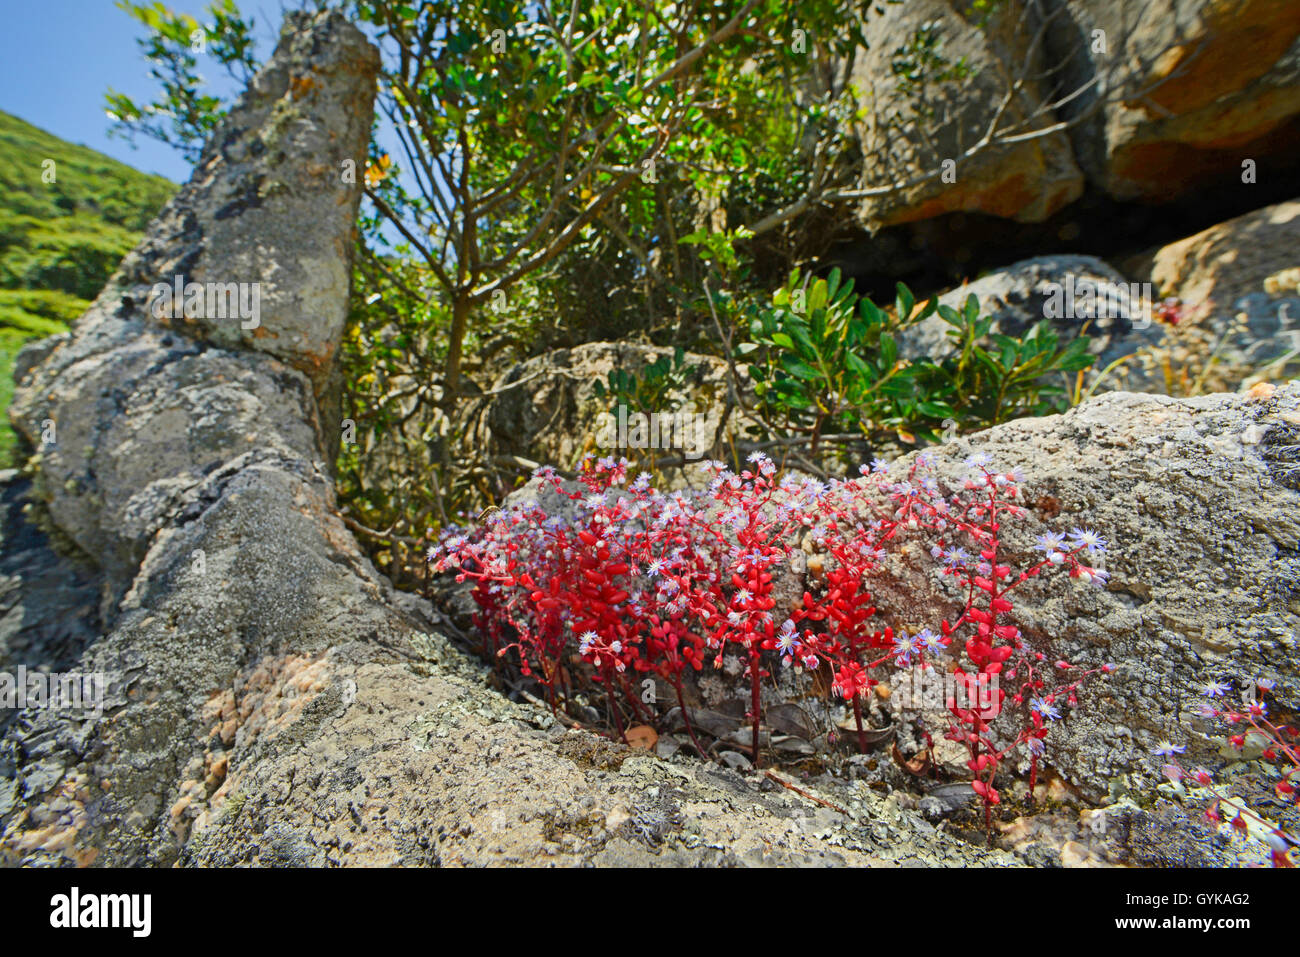 Sky Stone-crop, Baby-blue Stone-crop, Red-leaf Stone-crop, Sky Stonecrop, Baby-blue Stonecrop, Azure Stonecrop, Azure Stone-crop, Blue Stonecrop, Blue Stone-crop, Red-leaf Stonecrop (Sedum caeruleum), blooming on a rock, France, Corsica Stock Photo